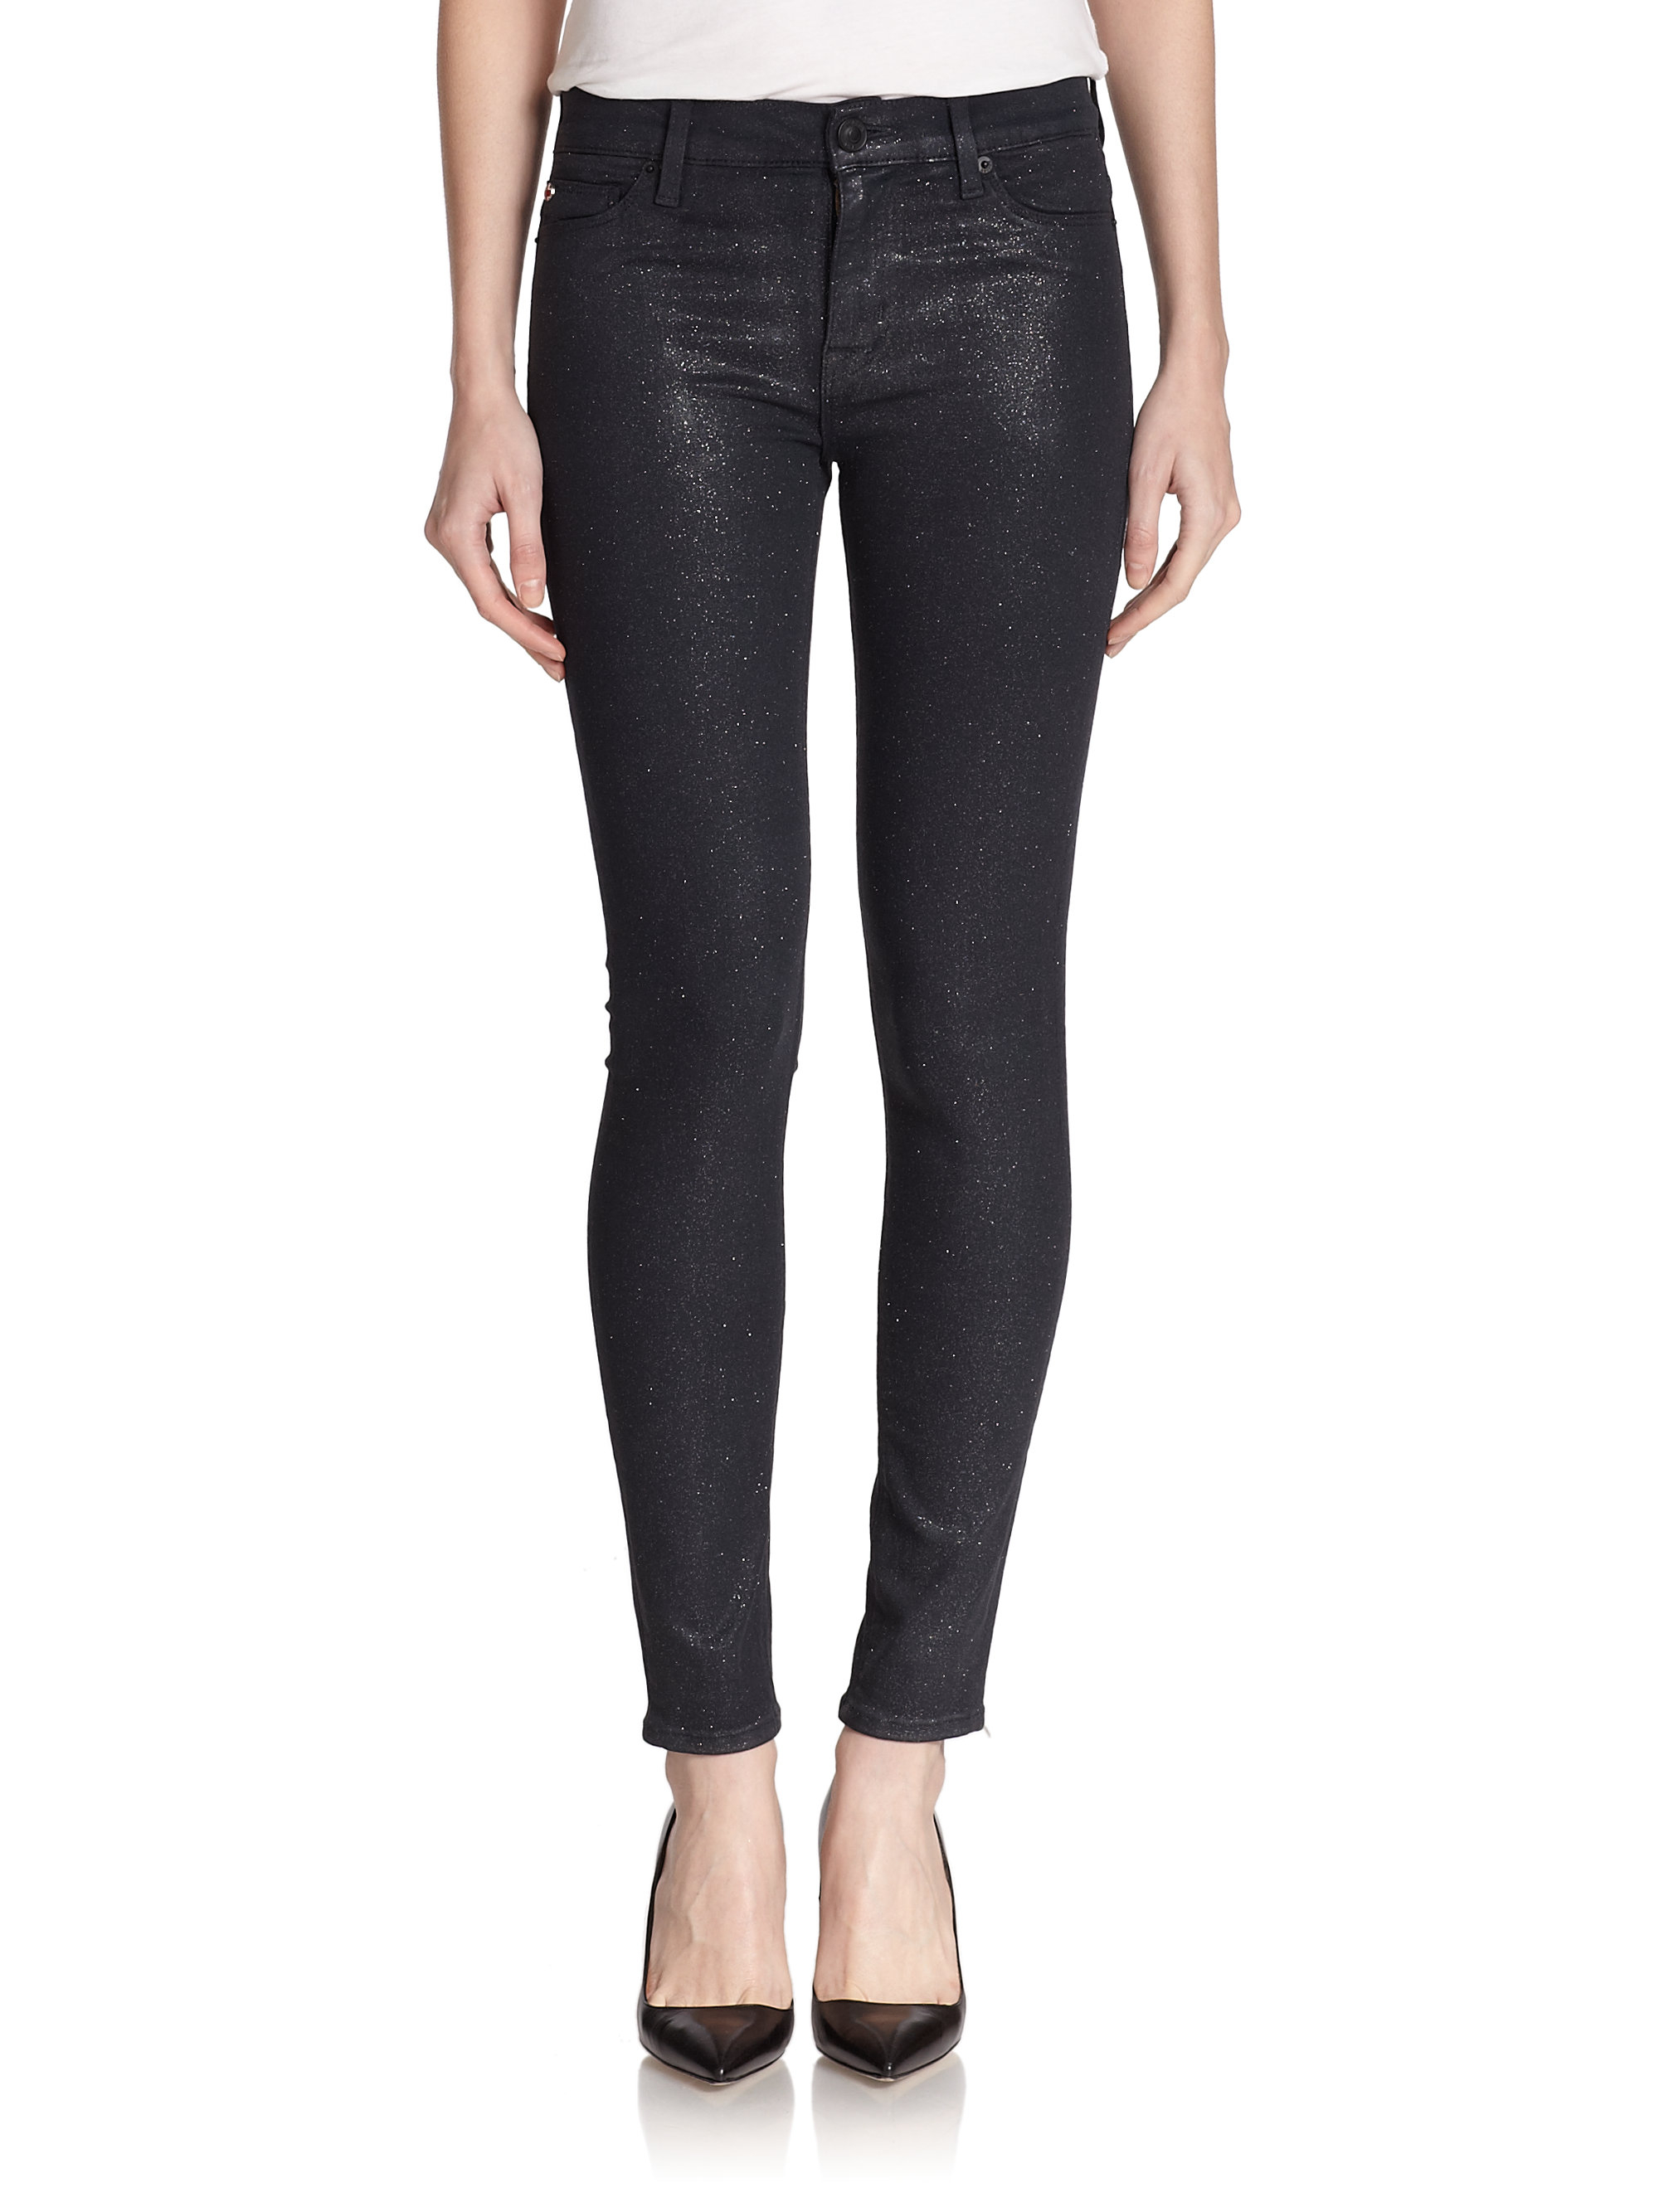 Lyst - Hudson Jeans Nico Coated Sparkle Skinny Jeans in Blue